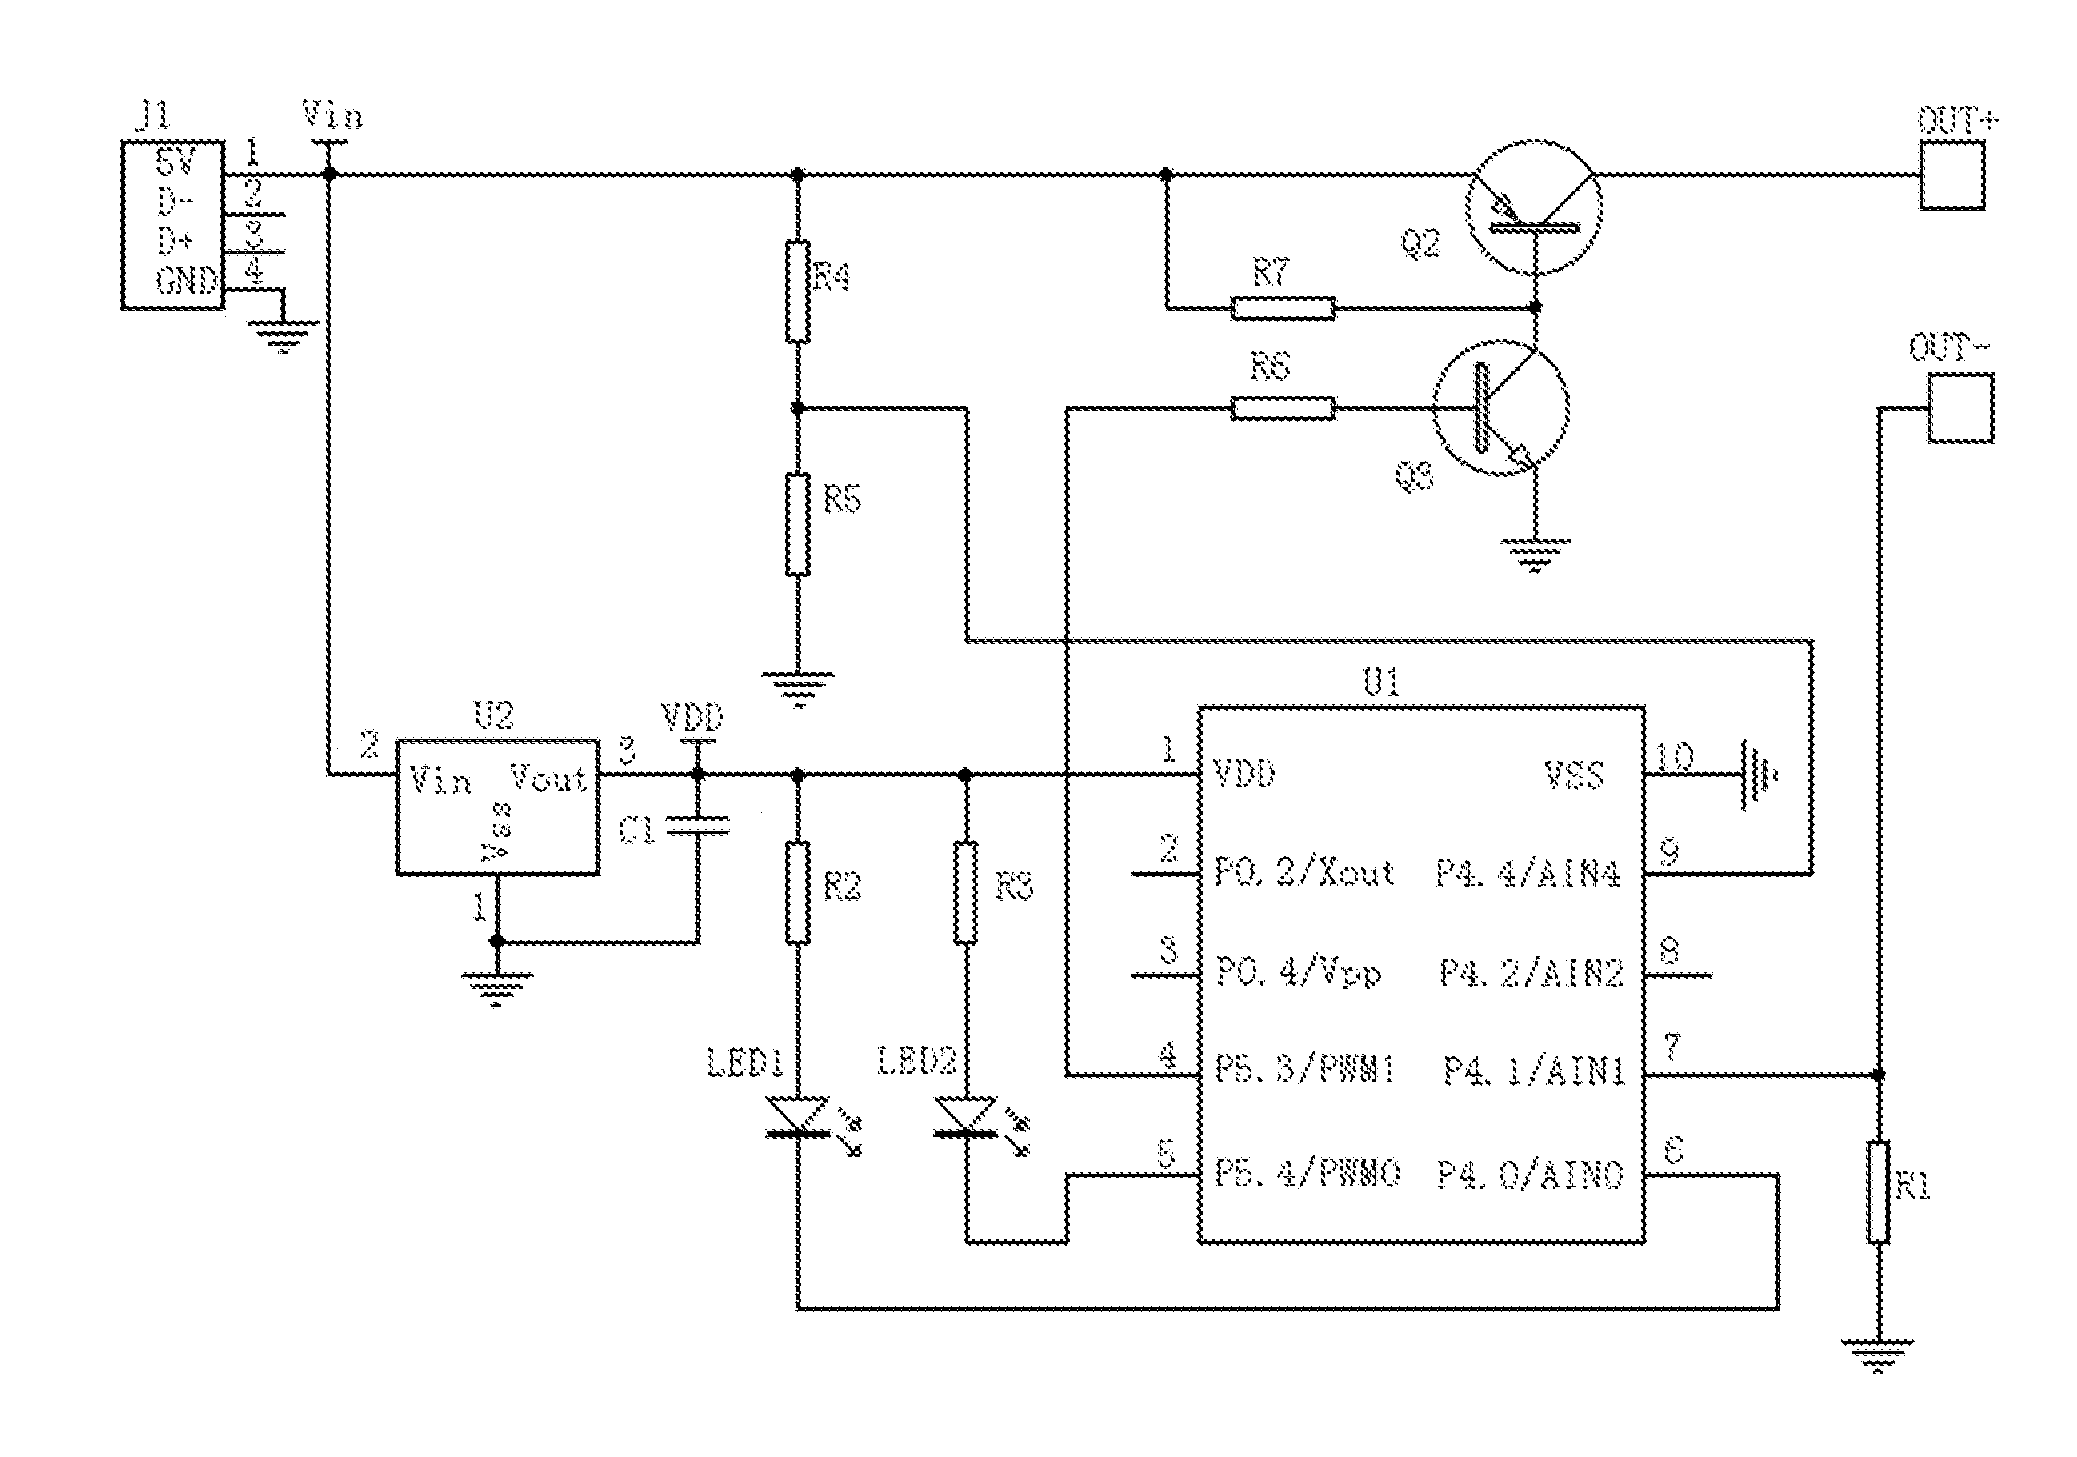 Charger with over-voltage and over-current protection and method for using the same